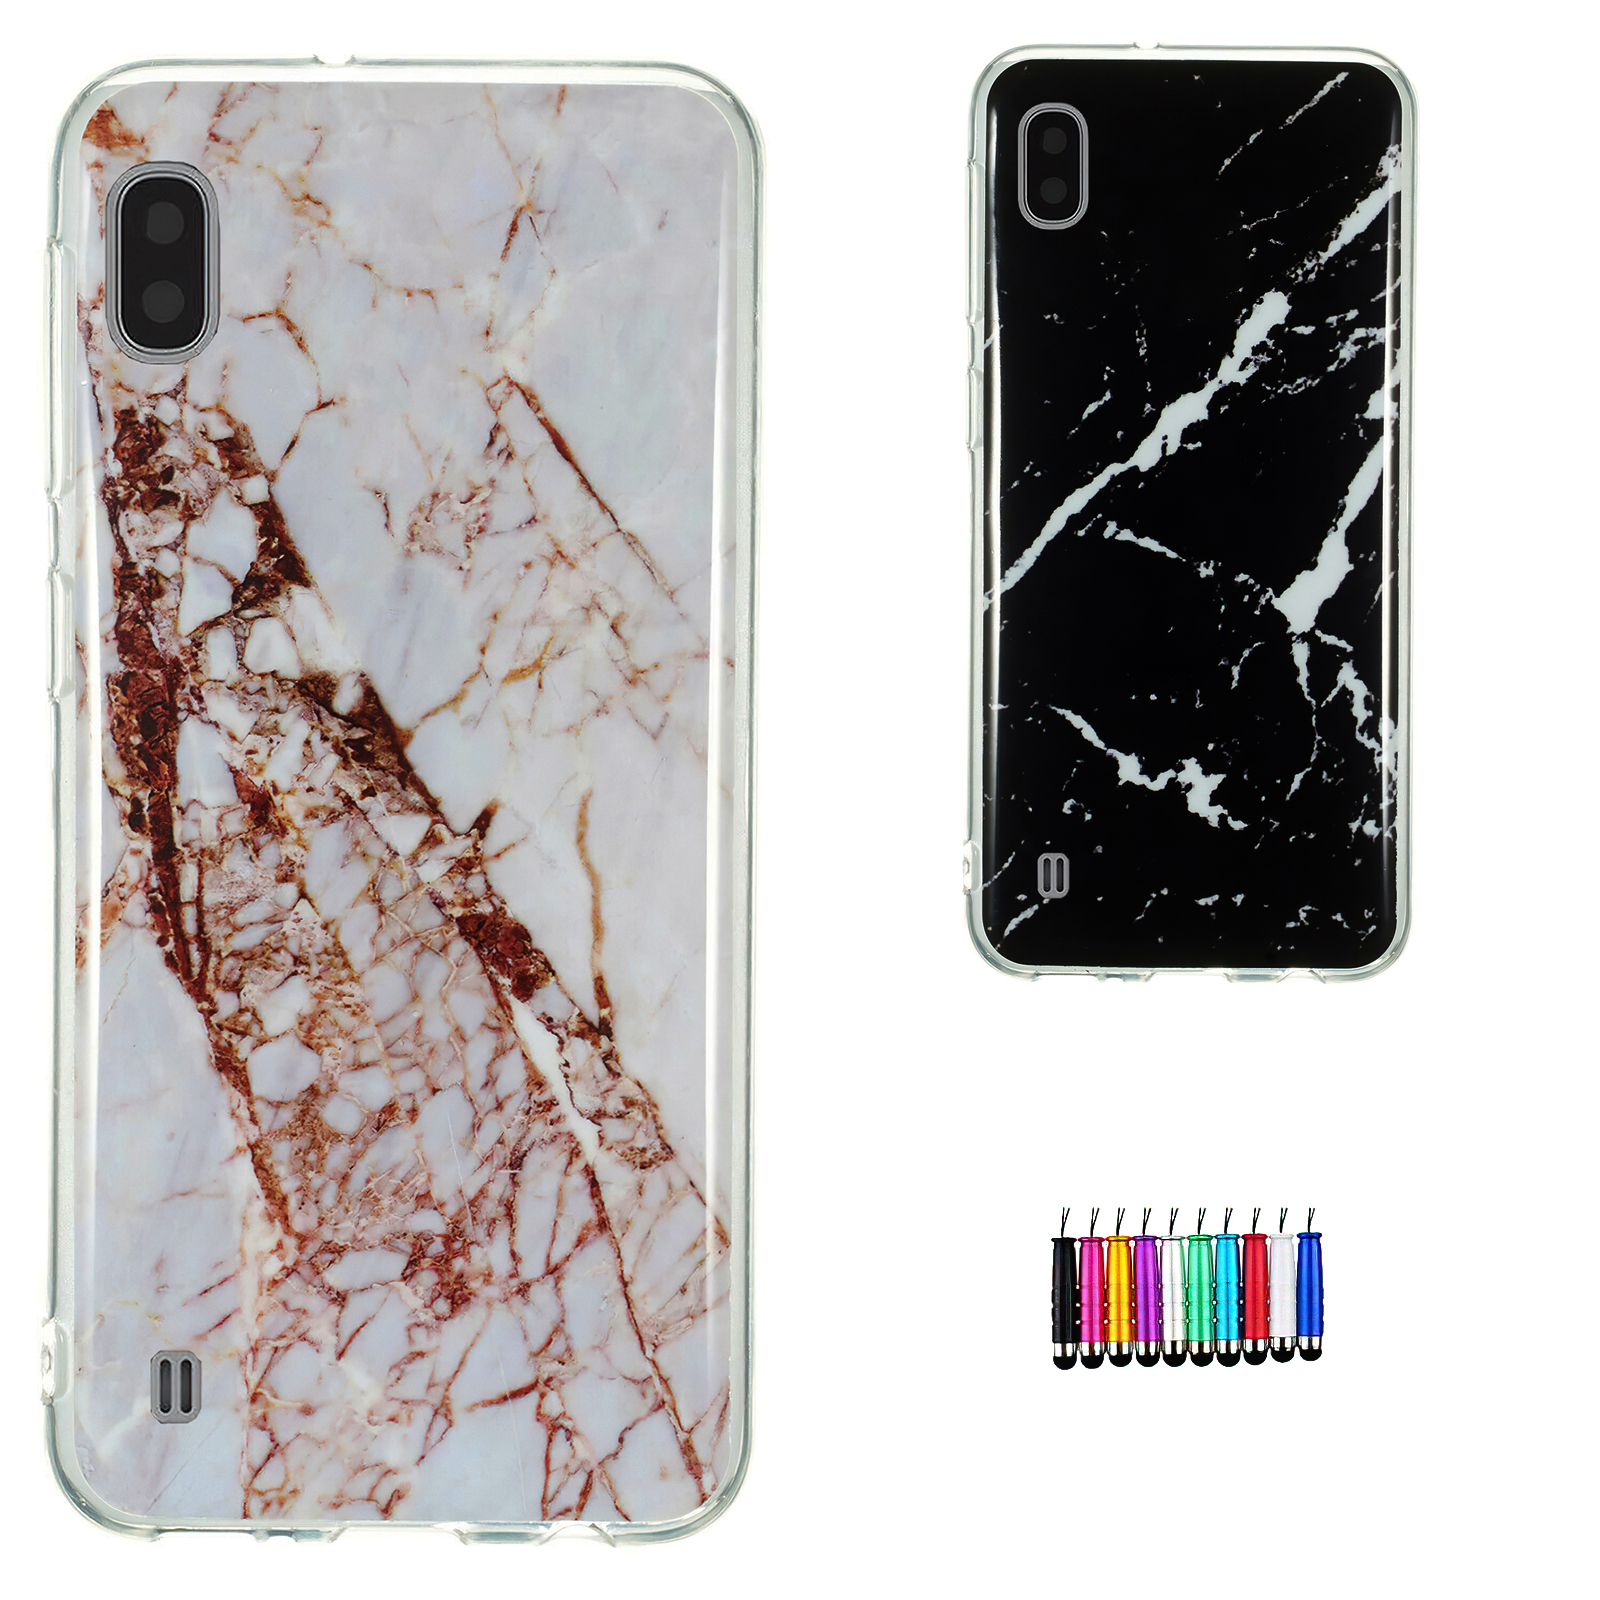 Samsung Galaxy A10 - Case Protection Marble + Touch